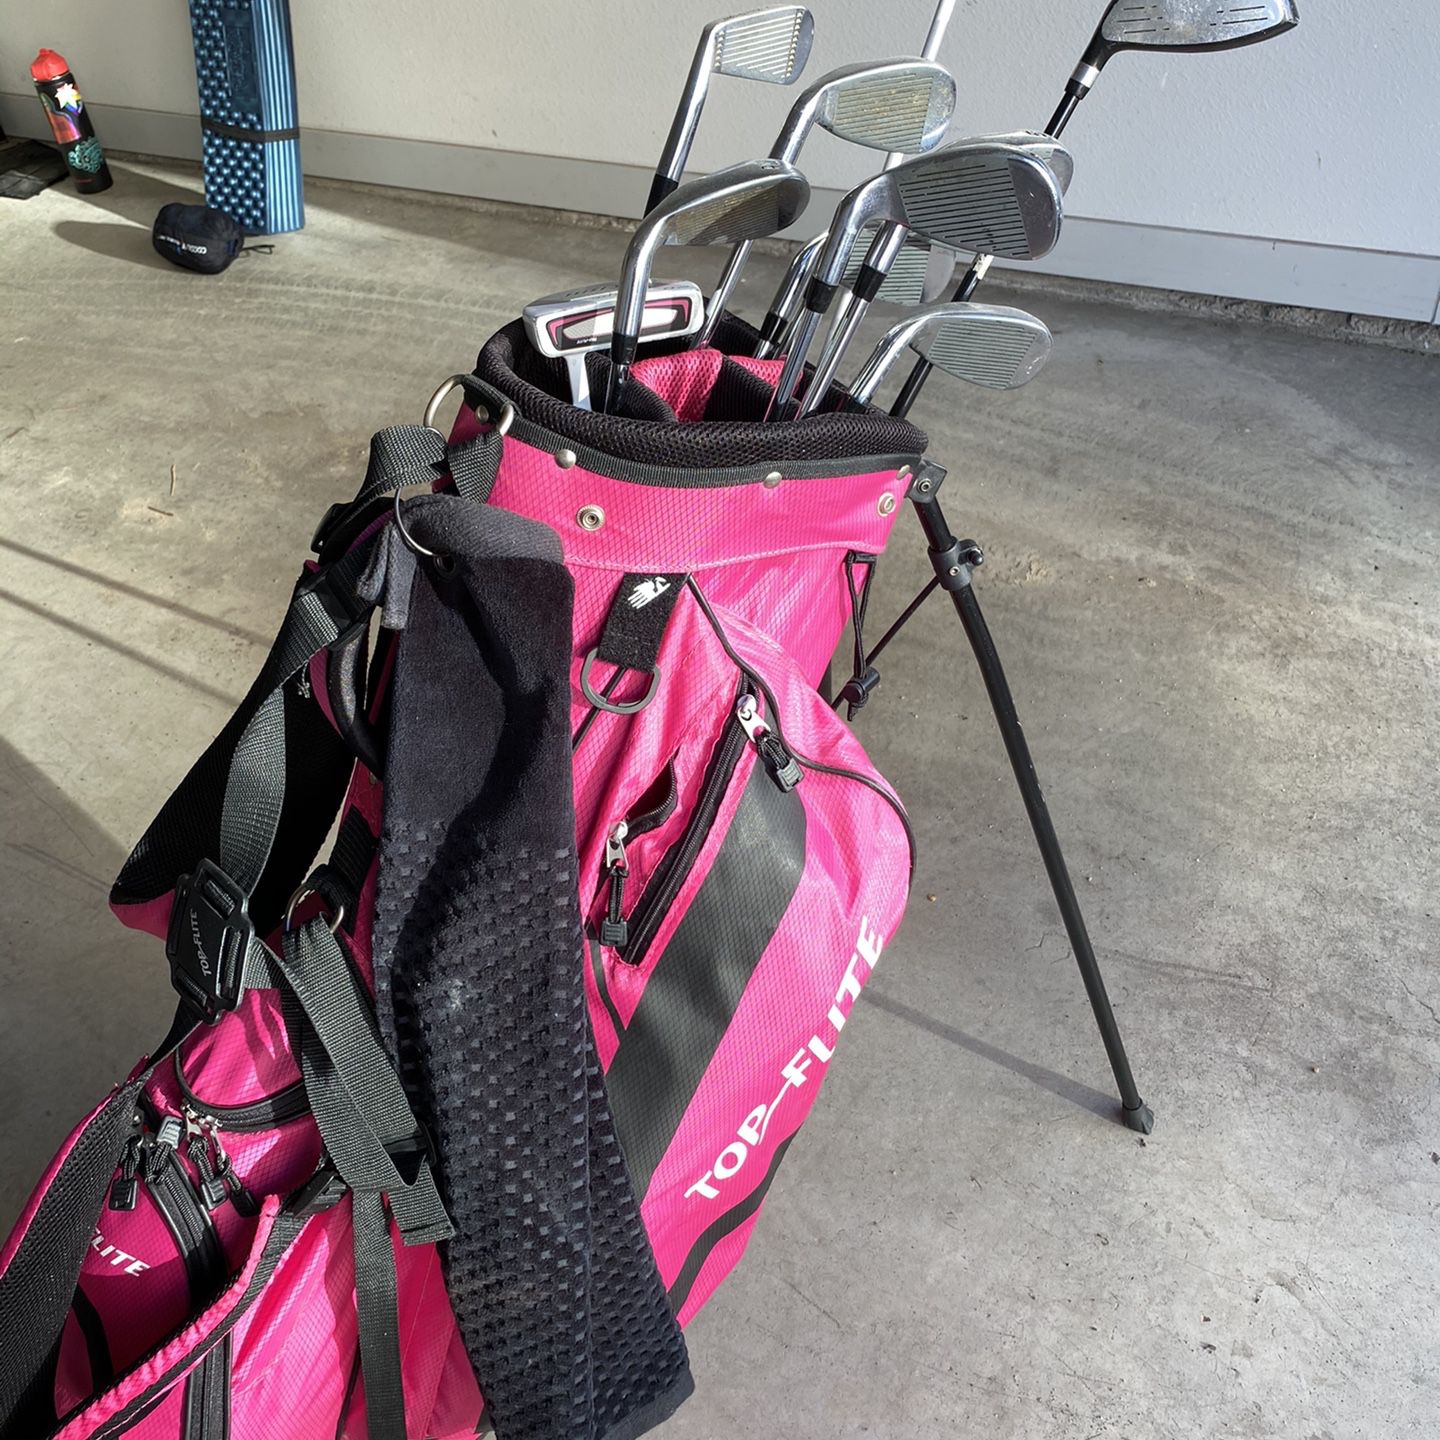 Women’s Top Flite Golf Bag, Clubs, and more!